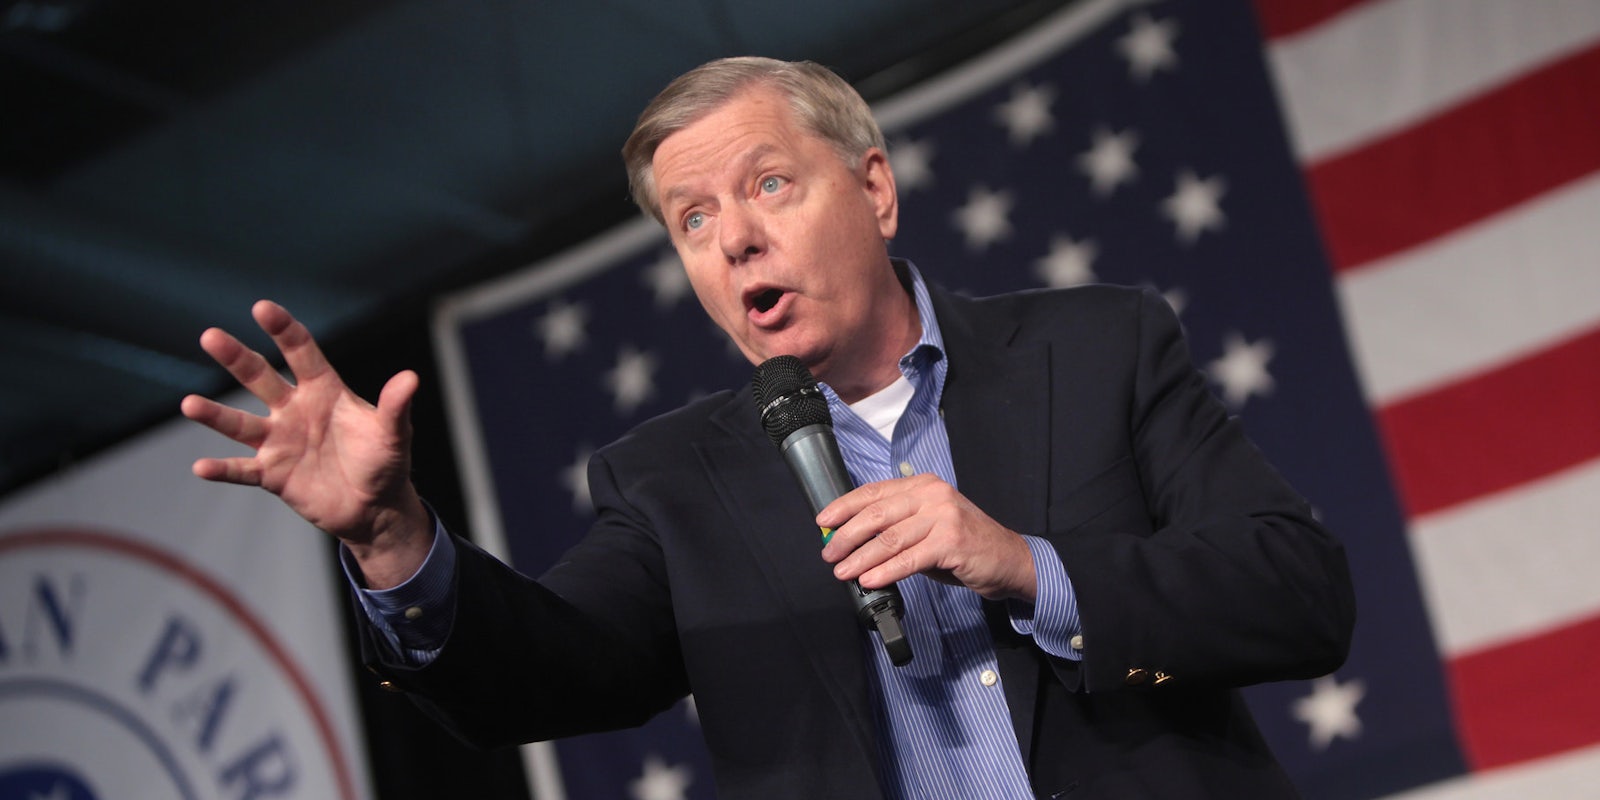 Sen. Lindsey Graham (R-S.C.) spoke directly to President Donald Trump on Wednesday in one place he knew he'd probably reach him: Fox News.